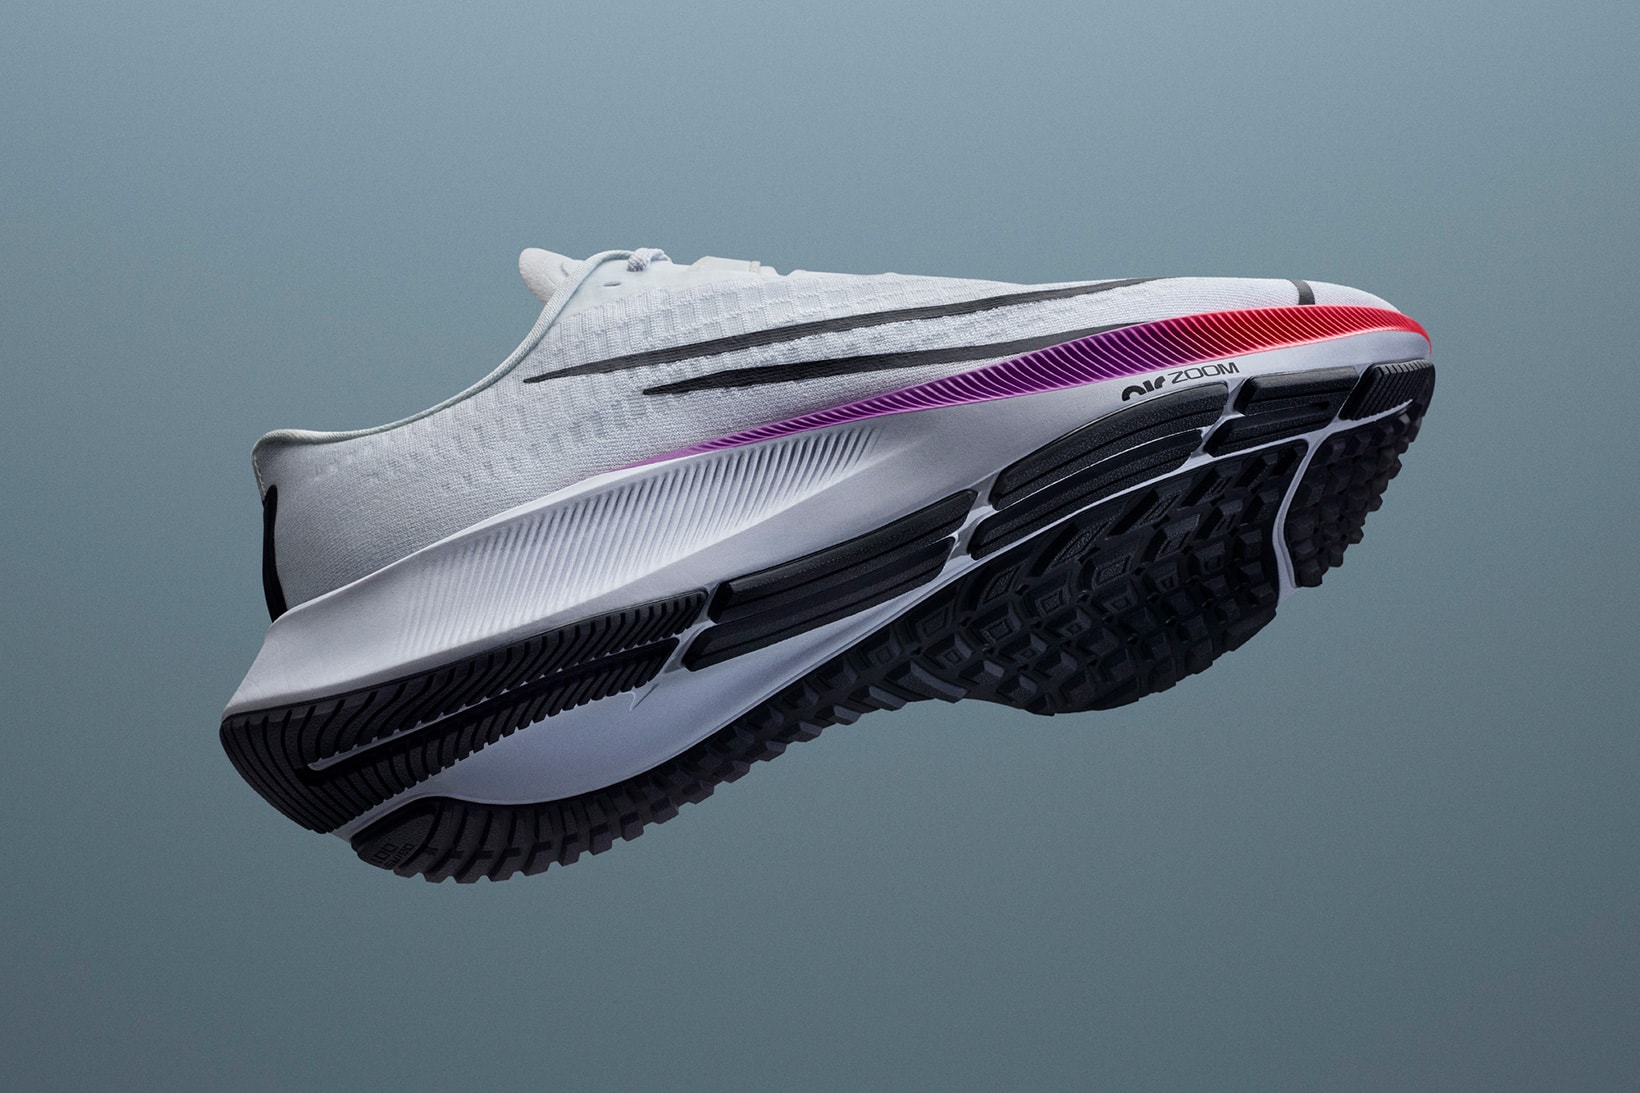 nike air zoom new colorways alphafly vaporfly tempo pegasus 37 next running